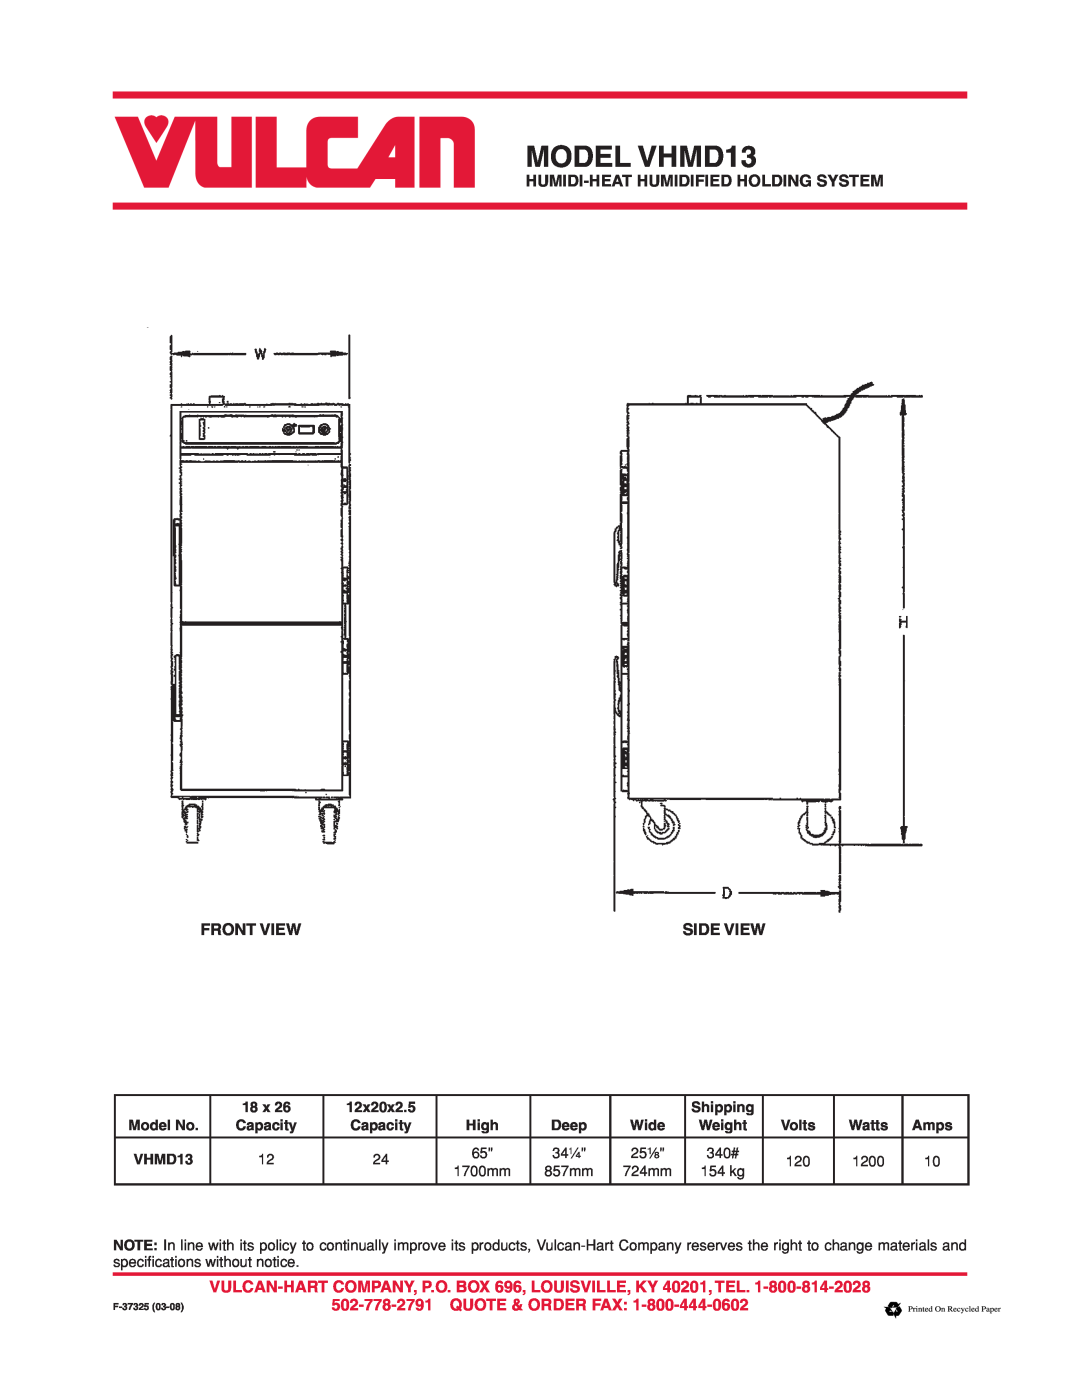 Vulcan-Hart Front View, Side View, MODEL VHMD13, Humidi-Heathumidified Holding System, Quote & Order Fax, 12x20x2.5 